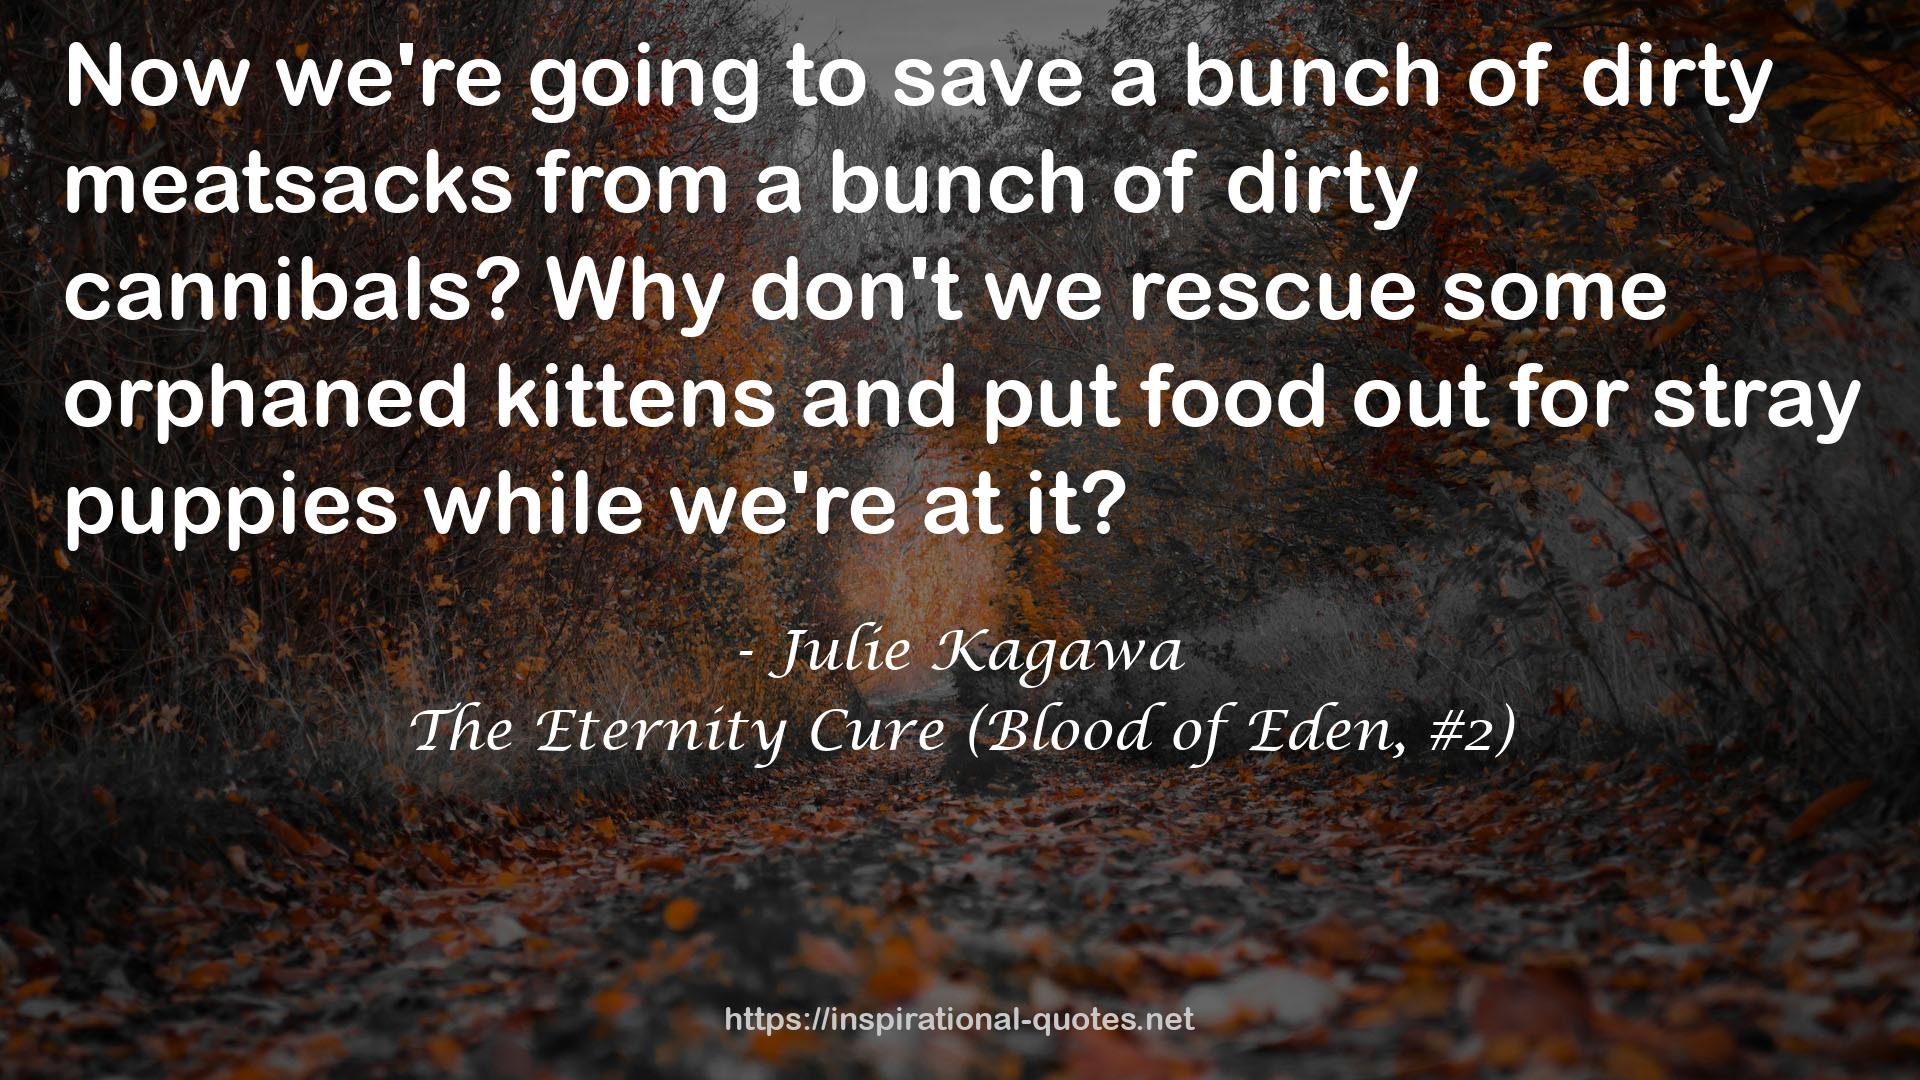 The Eternity Cure (Blood of Eden, #2) QUOTES